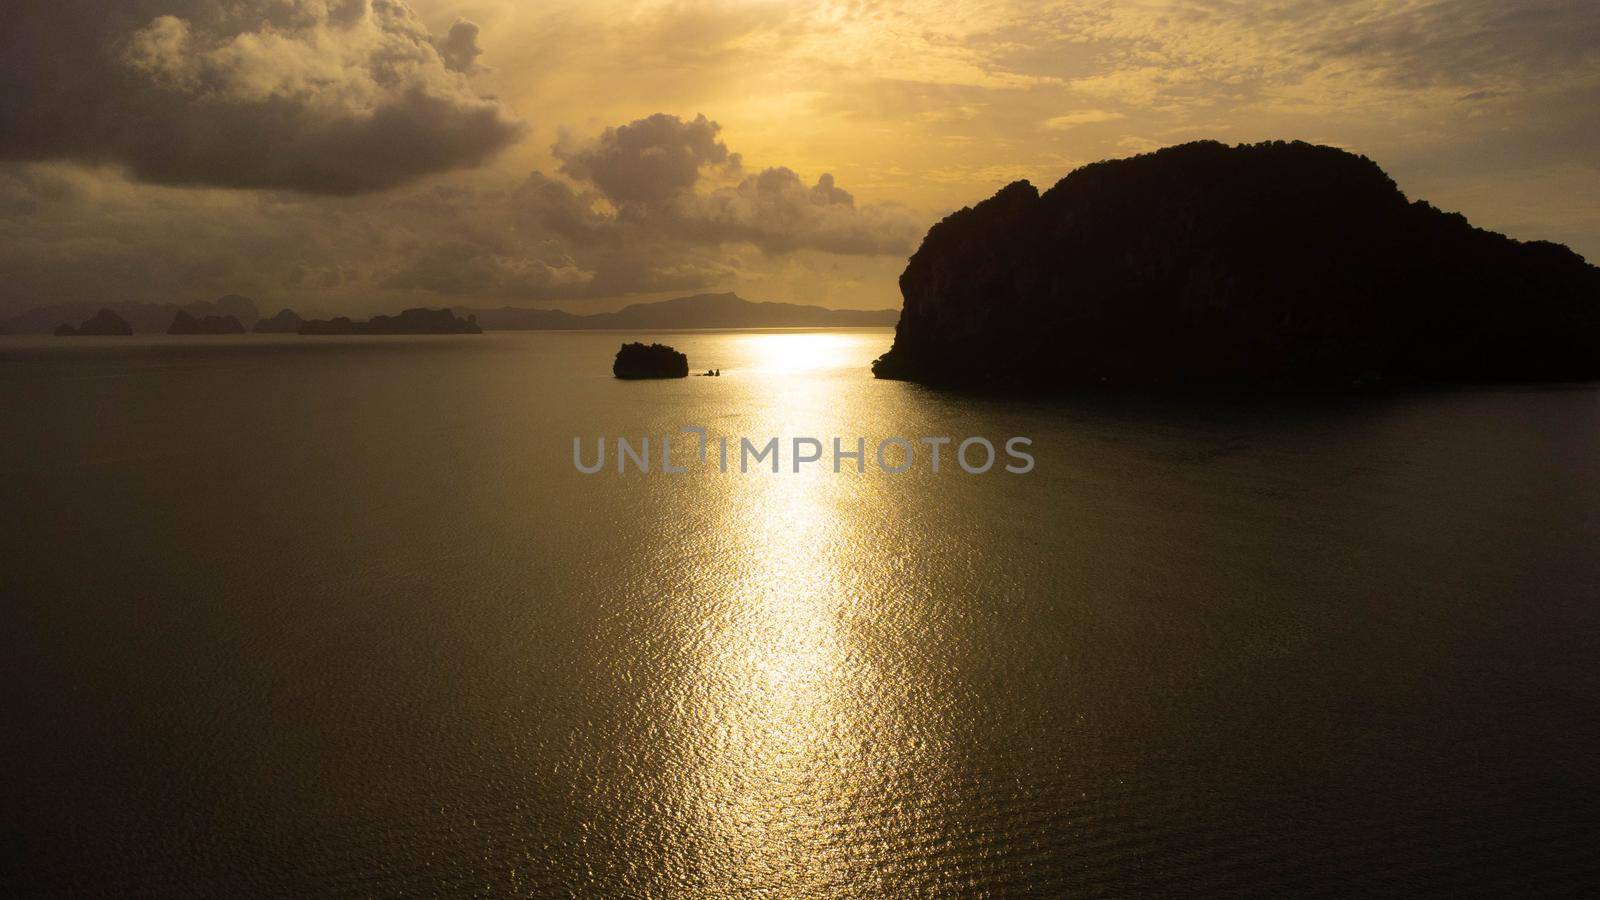 Beautiful view of the island in the tropical sea during sunset, Phang Nga, Thailand. Beautiful natural landscape background.